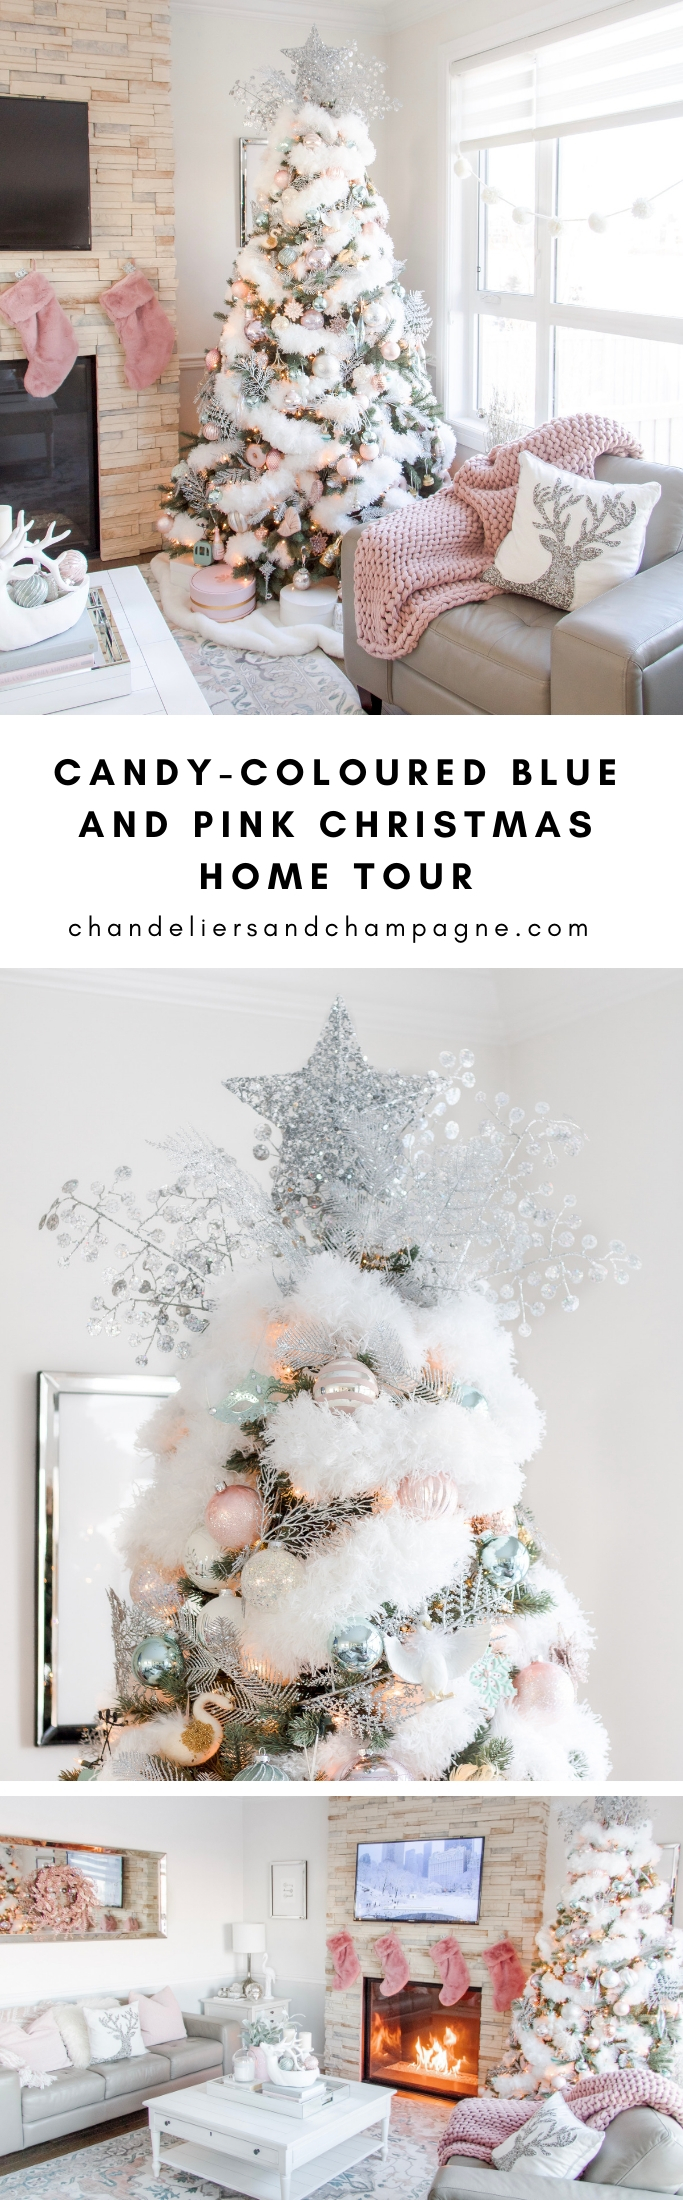 Candy-Coloured Blue and Pink Christmas Home Tour